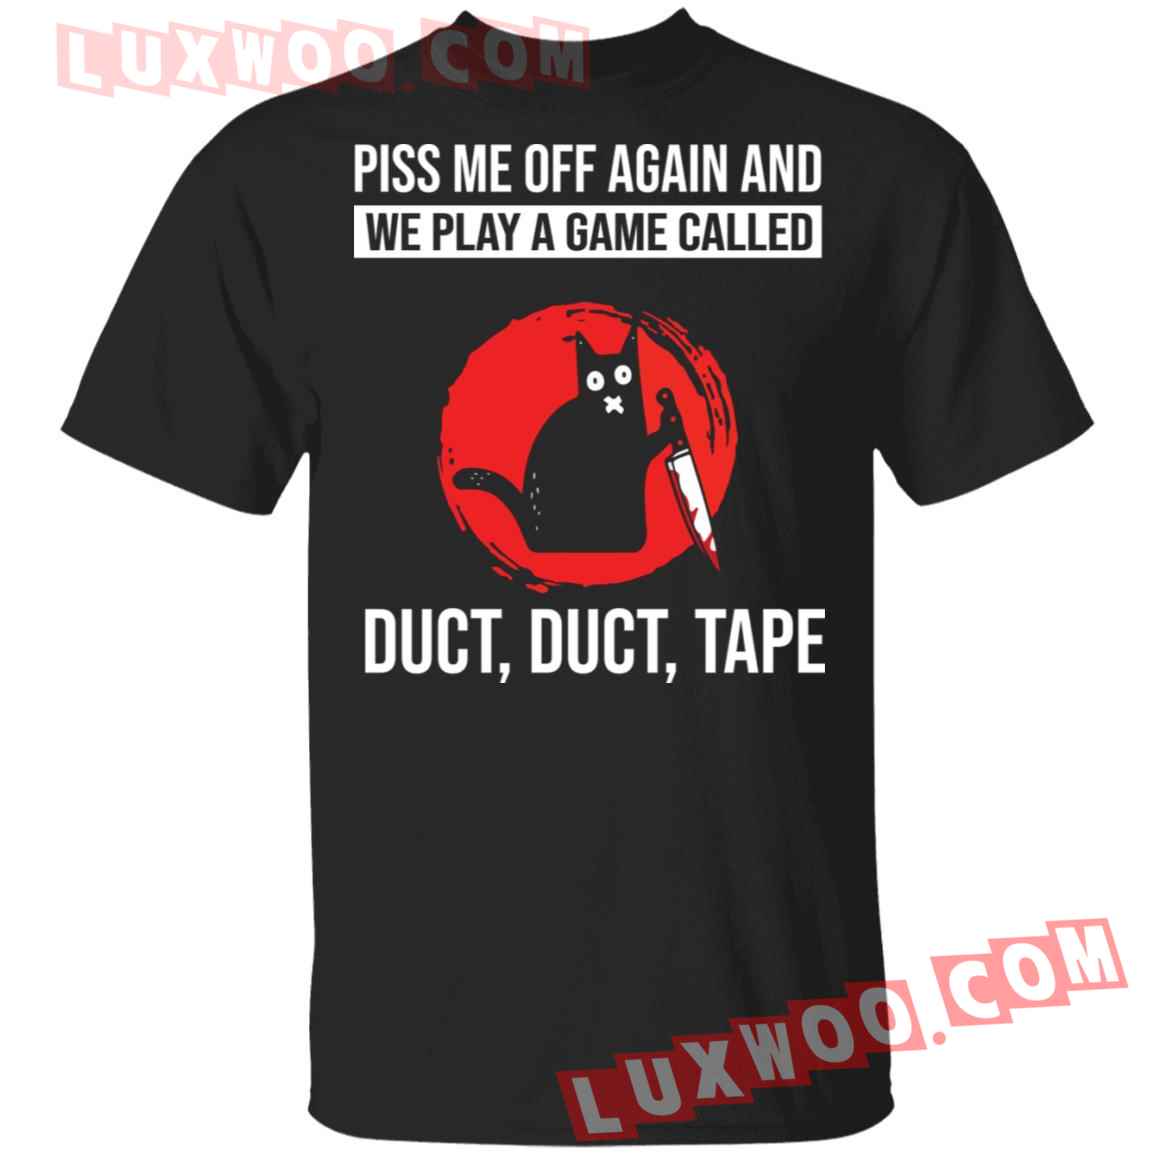 Black Cat Piss Me Off Again And We Play A Game Called Duct Duct Tape Shirt